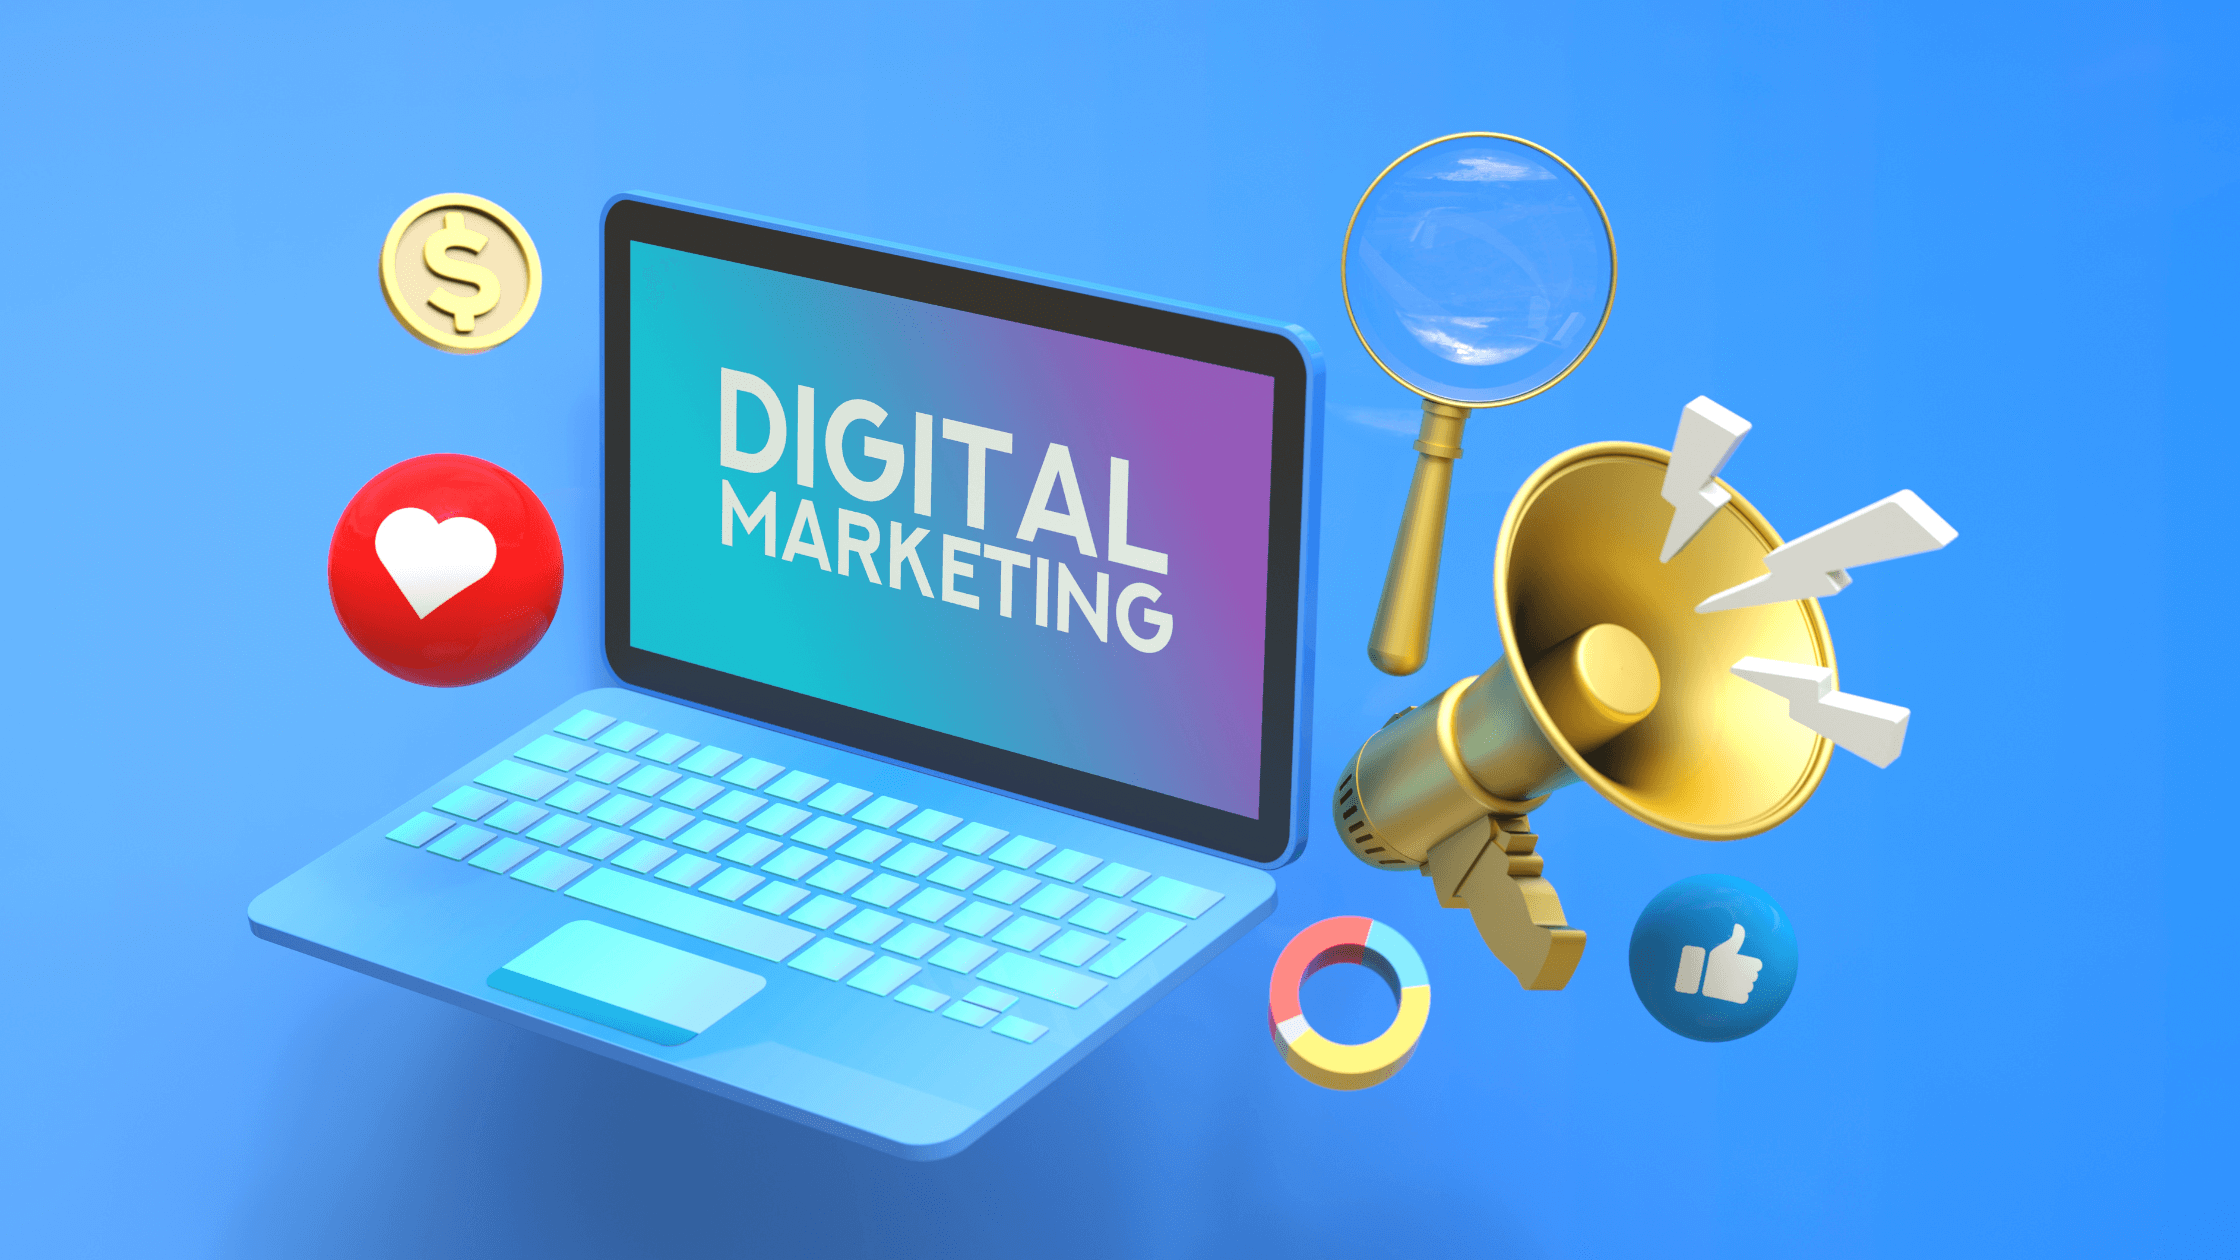 Drive traffic, leads, and revenue with our comprehensive digital marketing services. Social Media Marketing with ITLytical